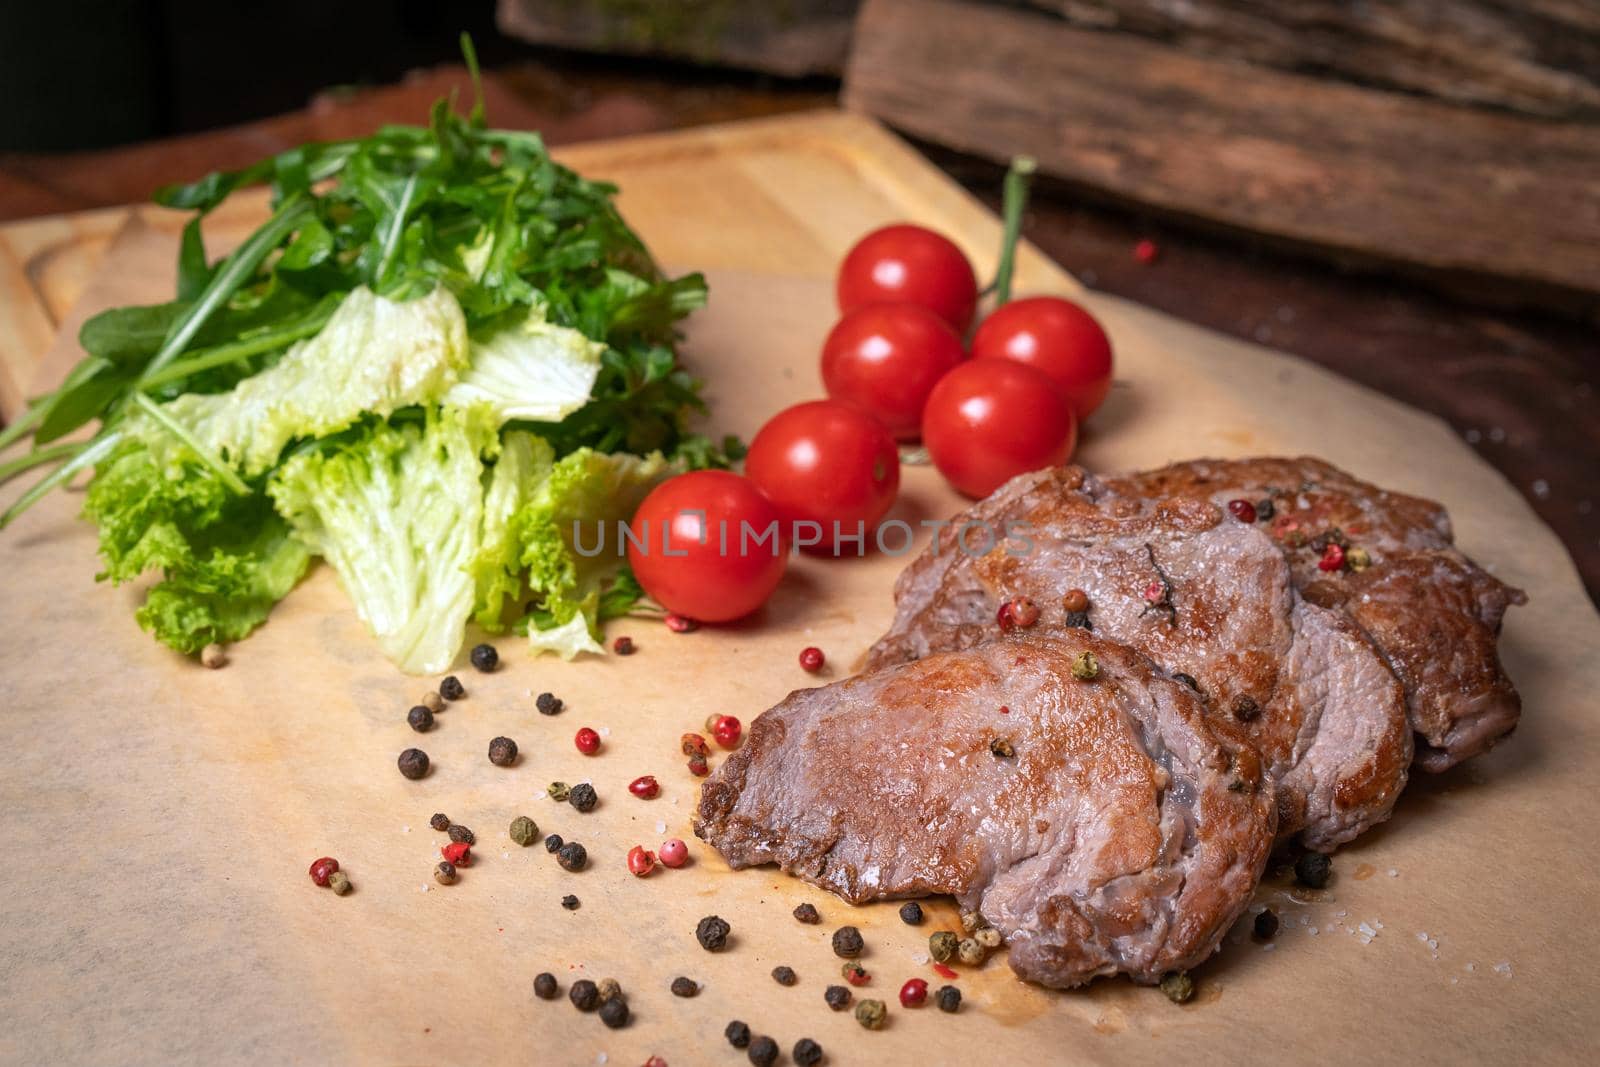 Pork fillets are served with barbecue sauce, soy sauce, cherry tomatoes, lettuce salad with arugula-seeded pepper mixture. Restaurant concept. Restaurant food. Grill concept.